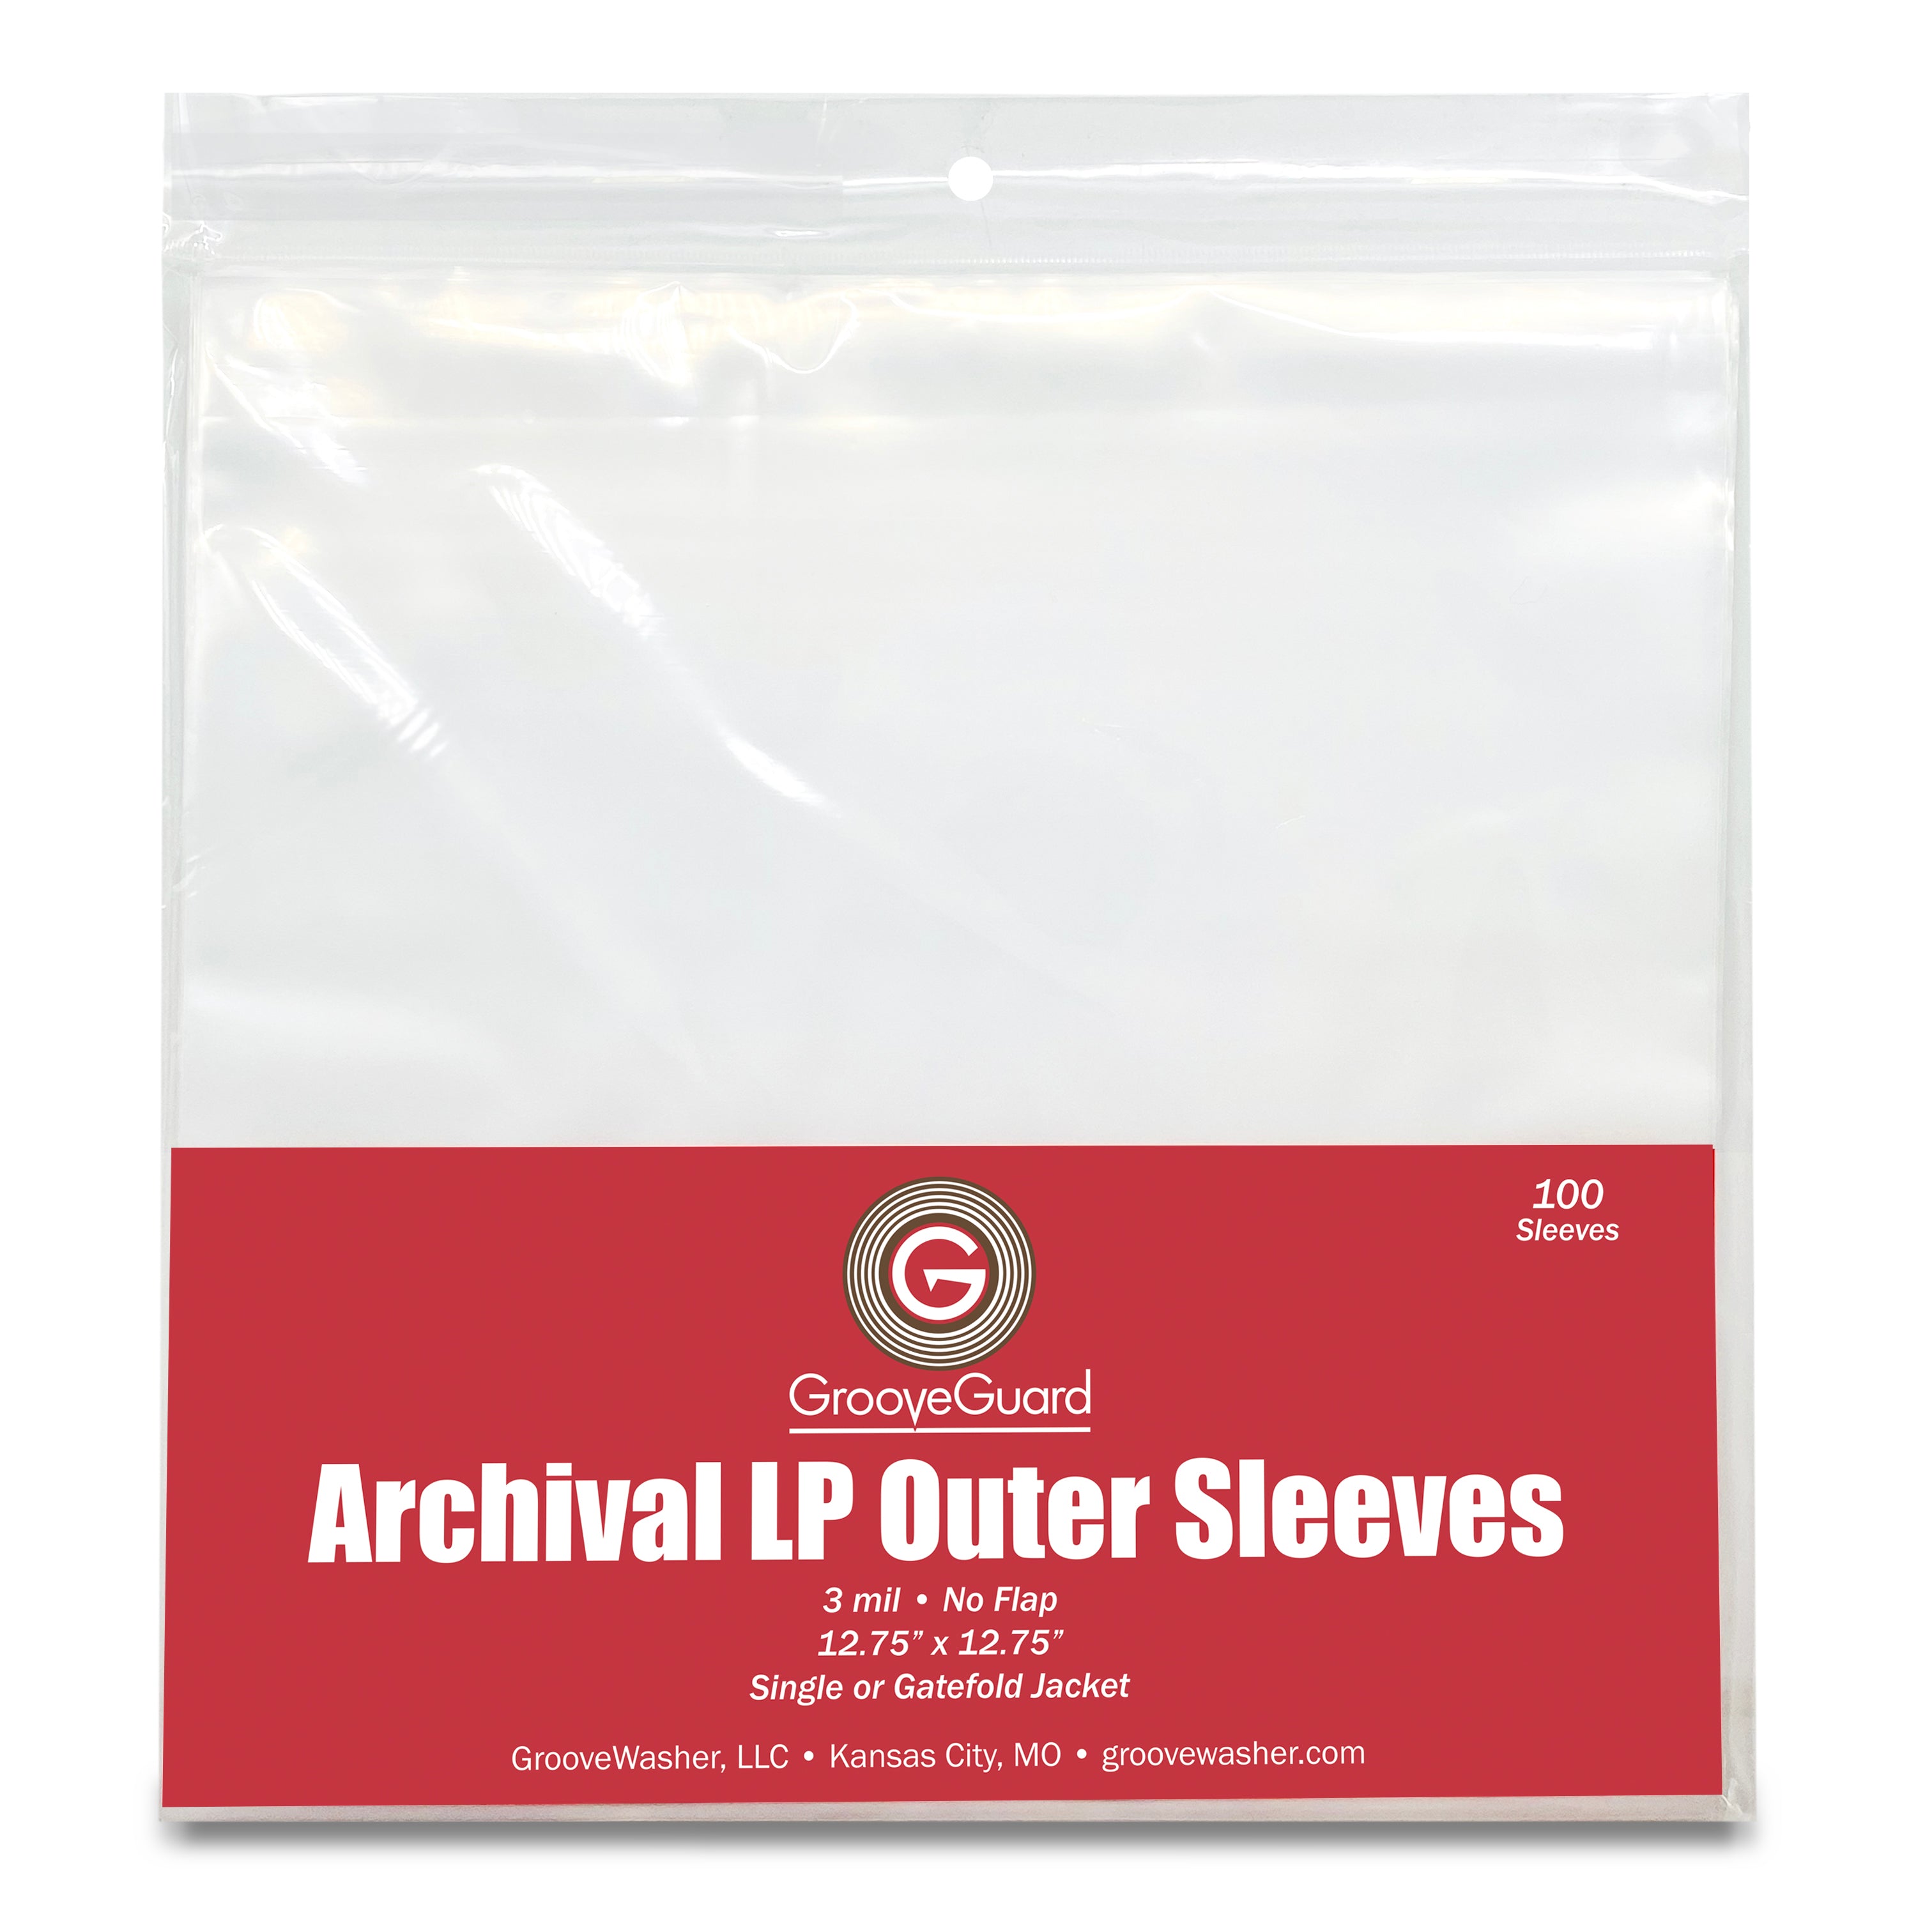 GrooveGuard: Archival LP Outer Sleeves (100) – GrooveWasher